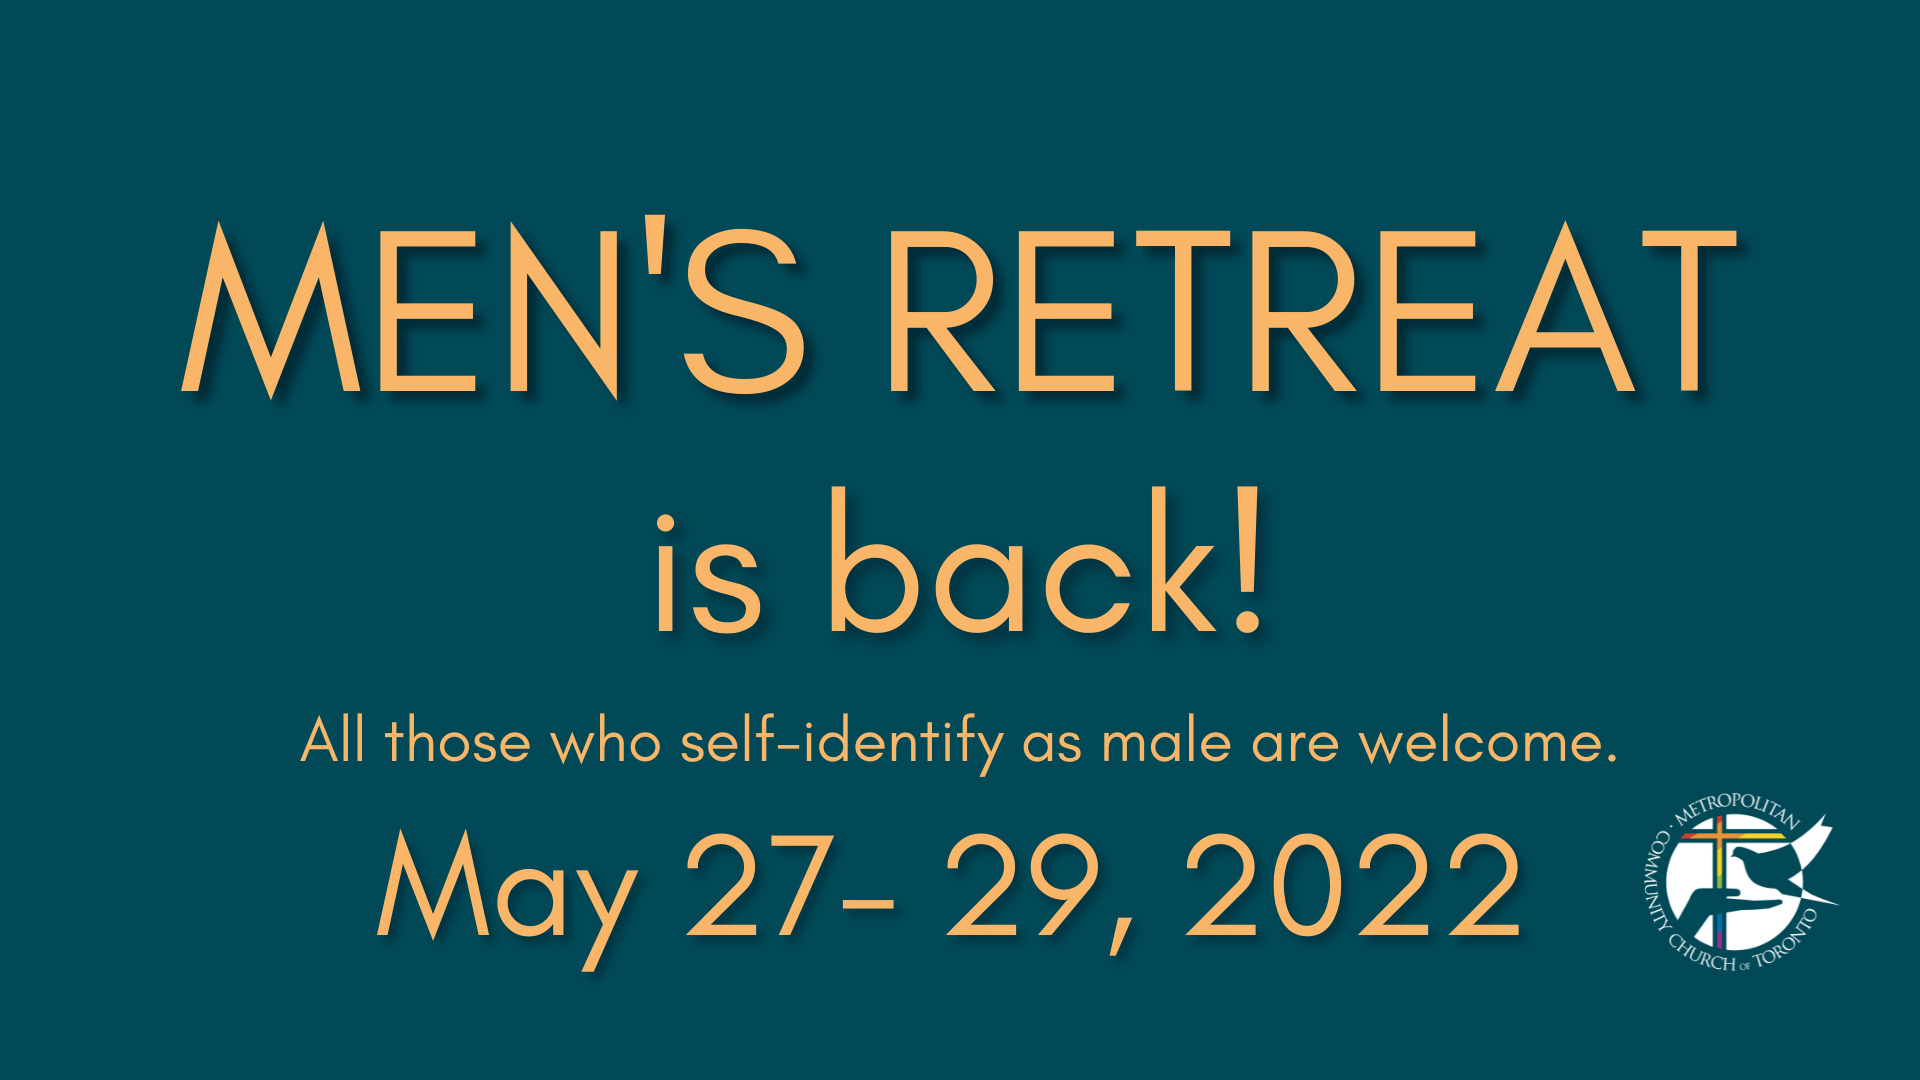 Text saying" Men's Retreat is back! All those who self-identify as male are welcome. May 27– 29, 2022" over a green background with an image of MCC Toronto's logo.